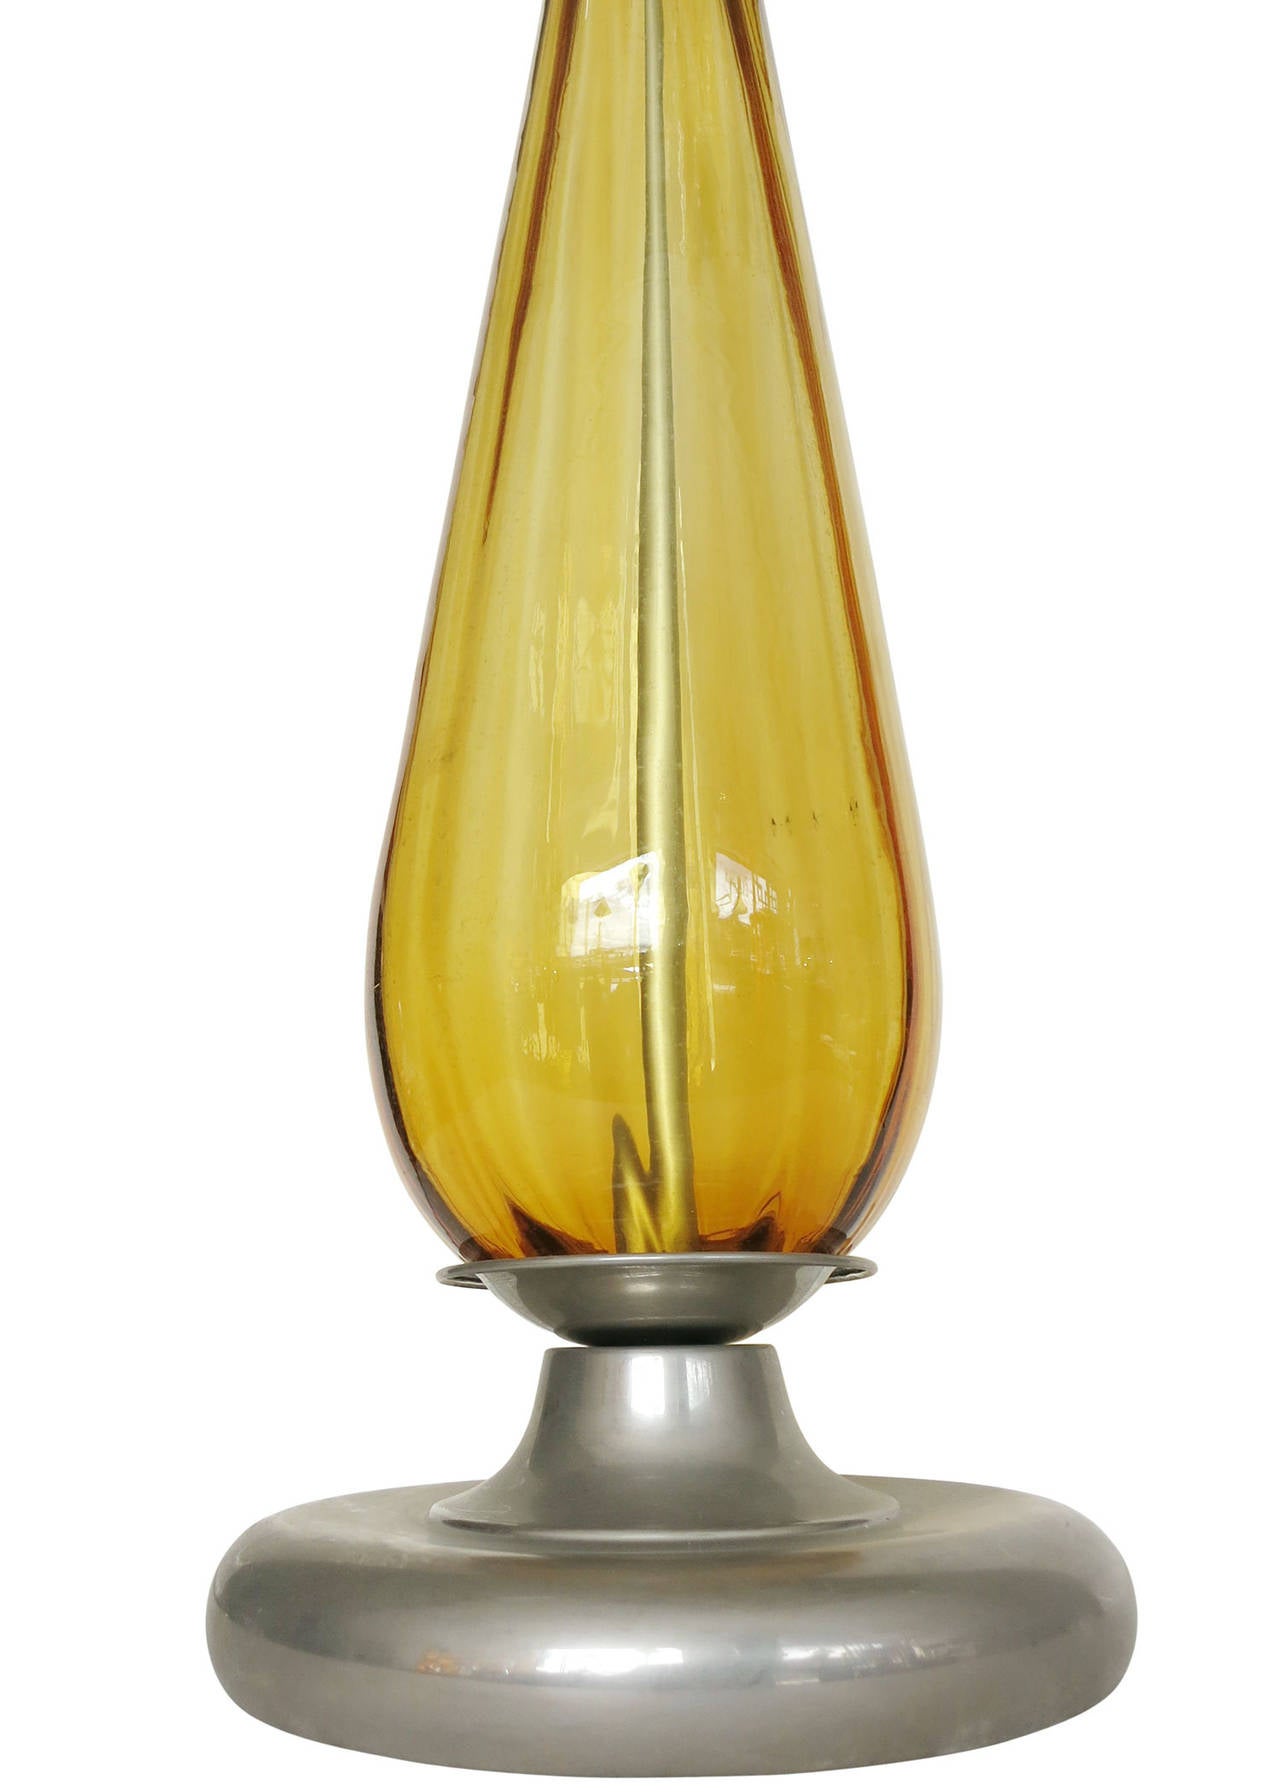 Mid-20th Century Archimede Seguso-Style Murano Glass Lamp in Opaline Yellow